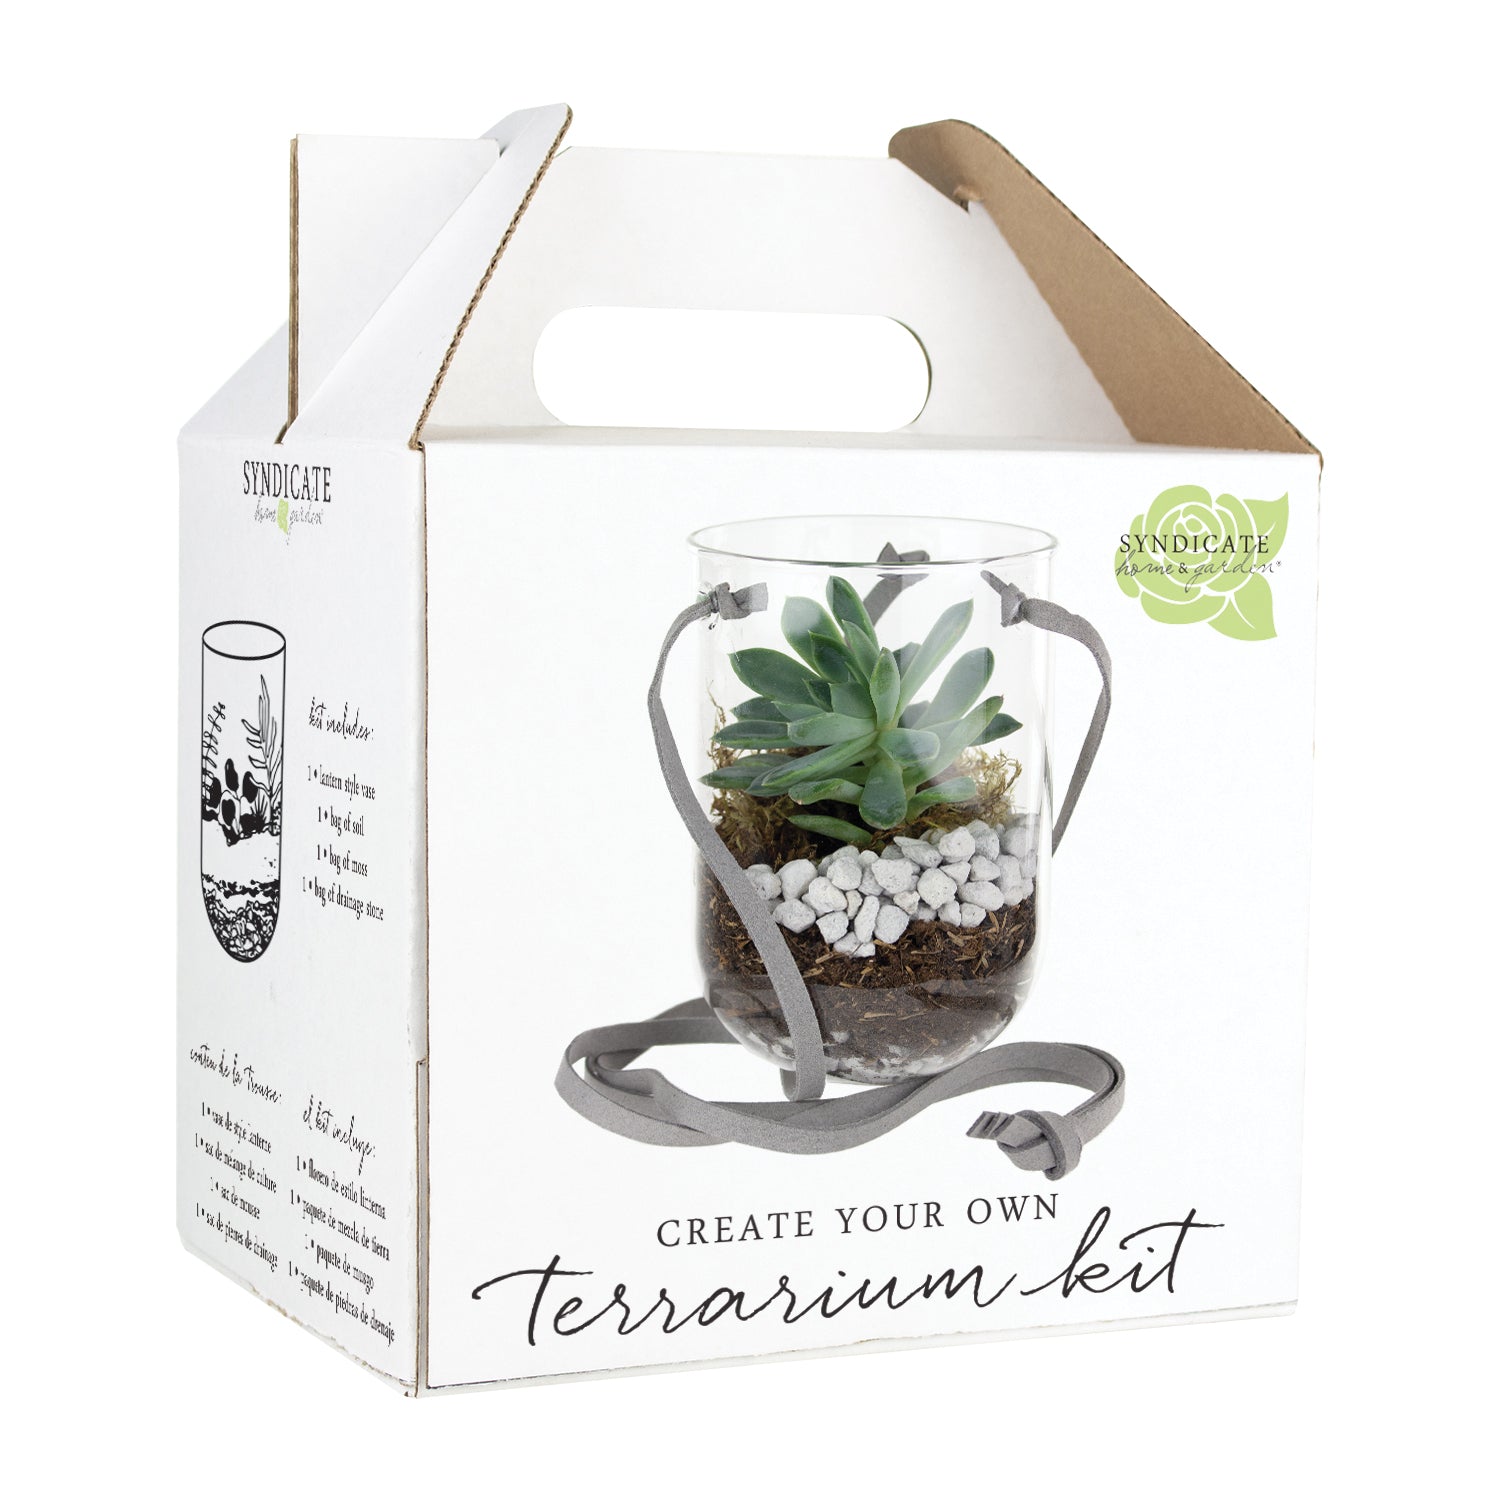 Create your own terrarium kit. Comes with a a capsule hanging terrarium, soil, rocks, and filler.